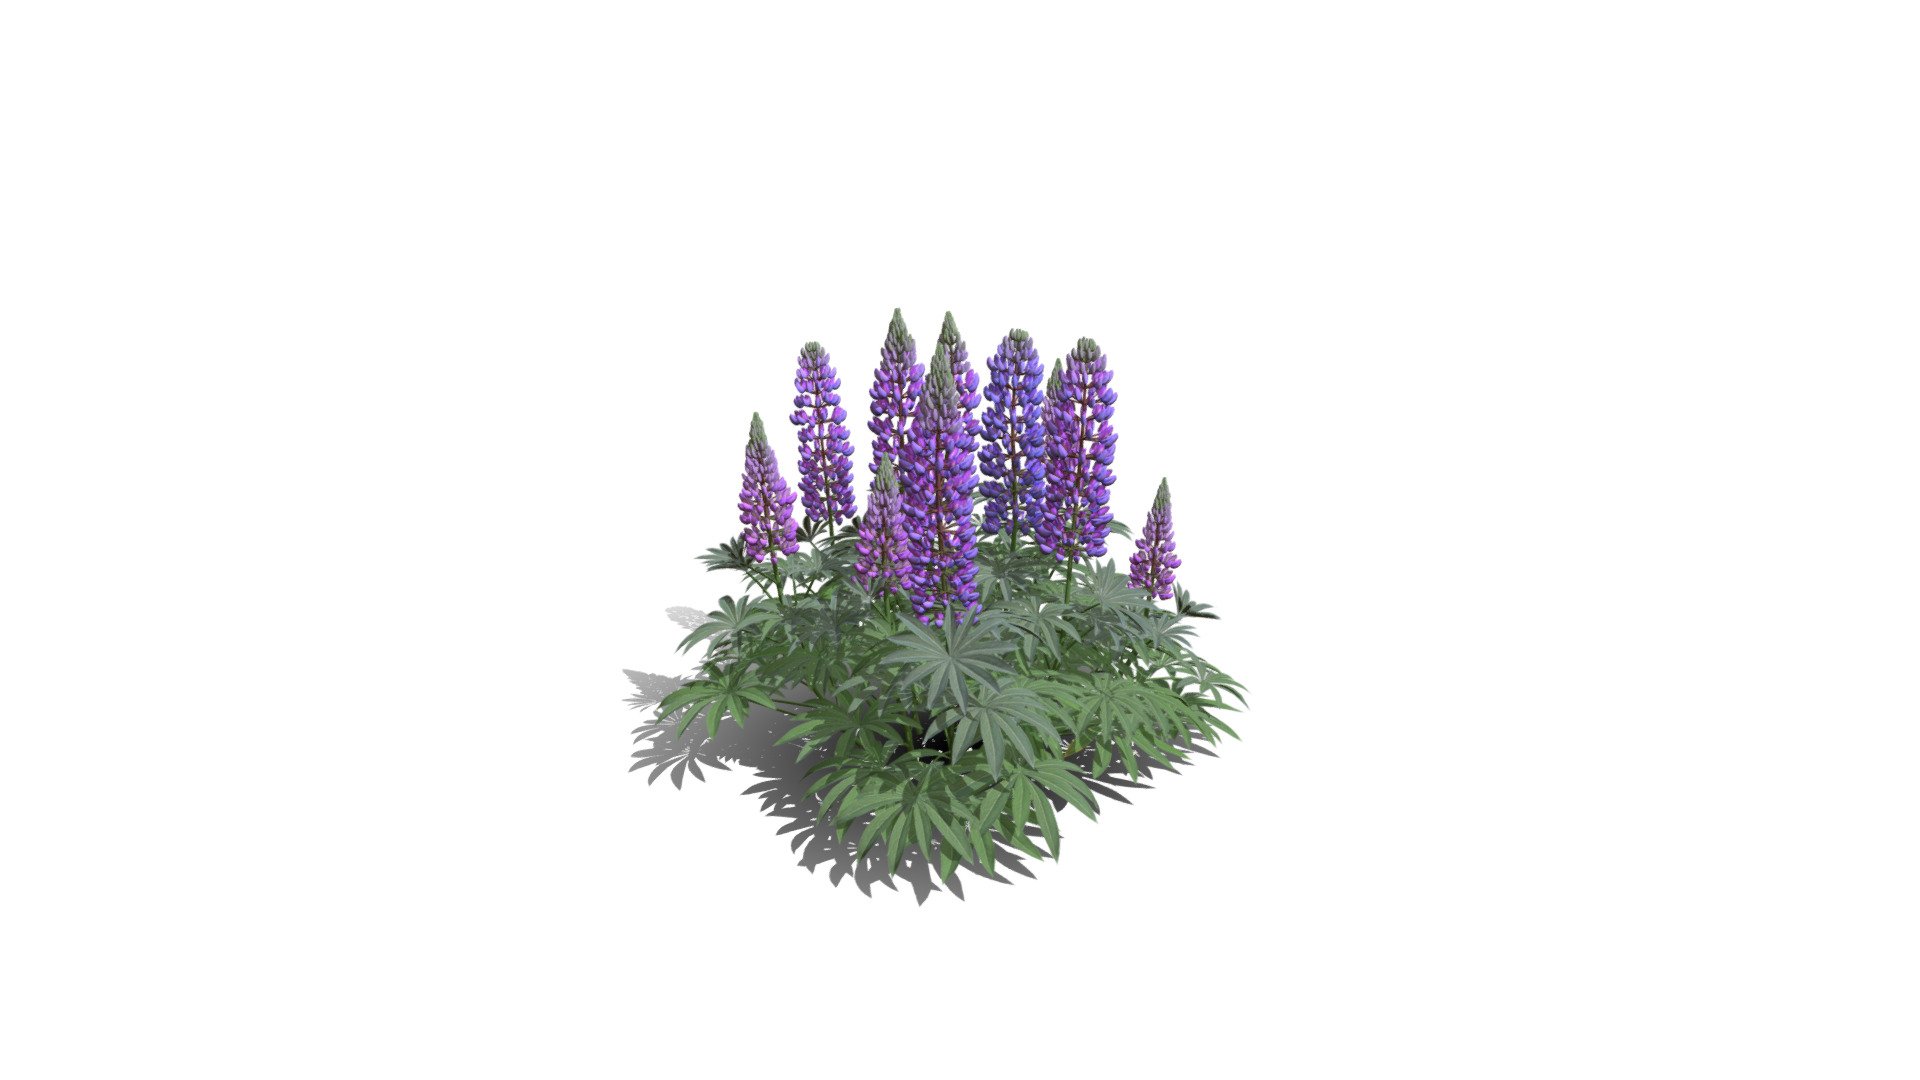 Model specs:





Species Latin name: Lupinus polyphyllus




Species Common name: Large-leaved lupine




Preset name: Short big group




Maturity stage: Adult




Health stage: Thriving




Season stage: Spring




Leaves count: 3855




Height: 0.7 meters




LODs included: Yes




Mesh type: static




Vertex colors: (R) Material blending, (A) Ambient occlusion



Better used for Hi Poly workflows!

Species description:





Region: North America




Biomes: Grassland




Climatic Zones: Cold temperate,Warm temperate




Plant type: Perennial



This PlantCatalog mesh was exported at 40% of its maximum mesh resolution. With the full PlantCatalog, customize hundreds of procedural models + apply wind animations + convert to native shaders and a lot more: https://info.e-onsoftware.com/plantcatalog/ - Realistic HD Large-leaved lupine (6/18) - Buy Royalty Free 3D model by PlantCatalog 3d model